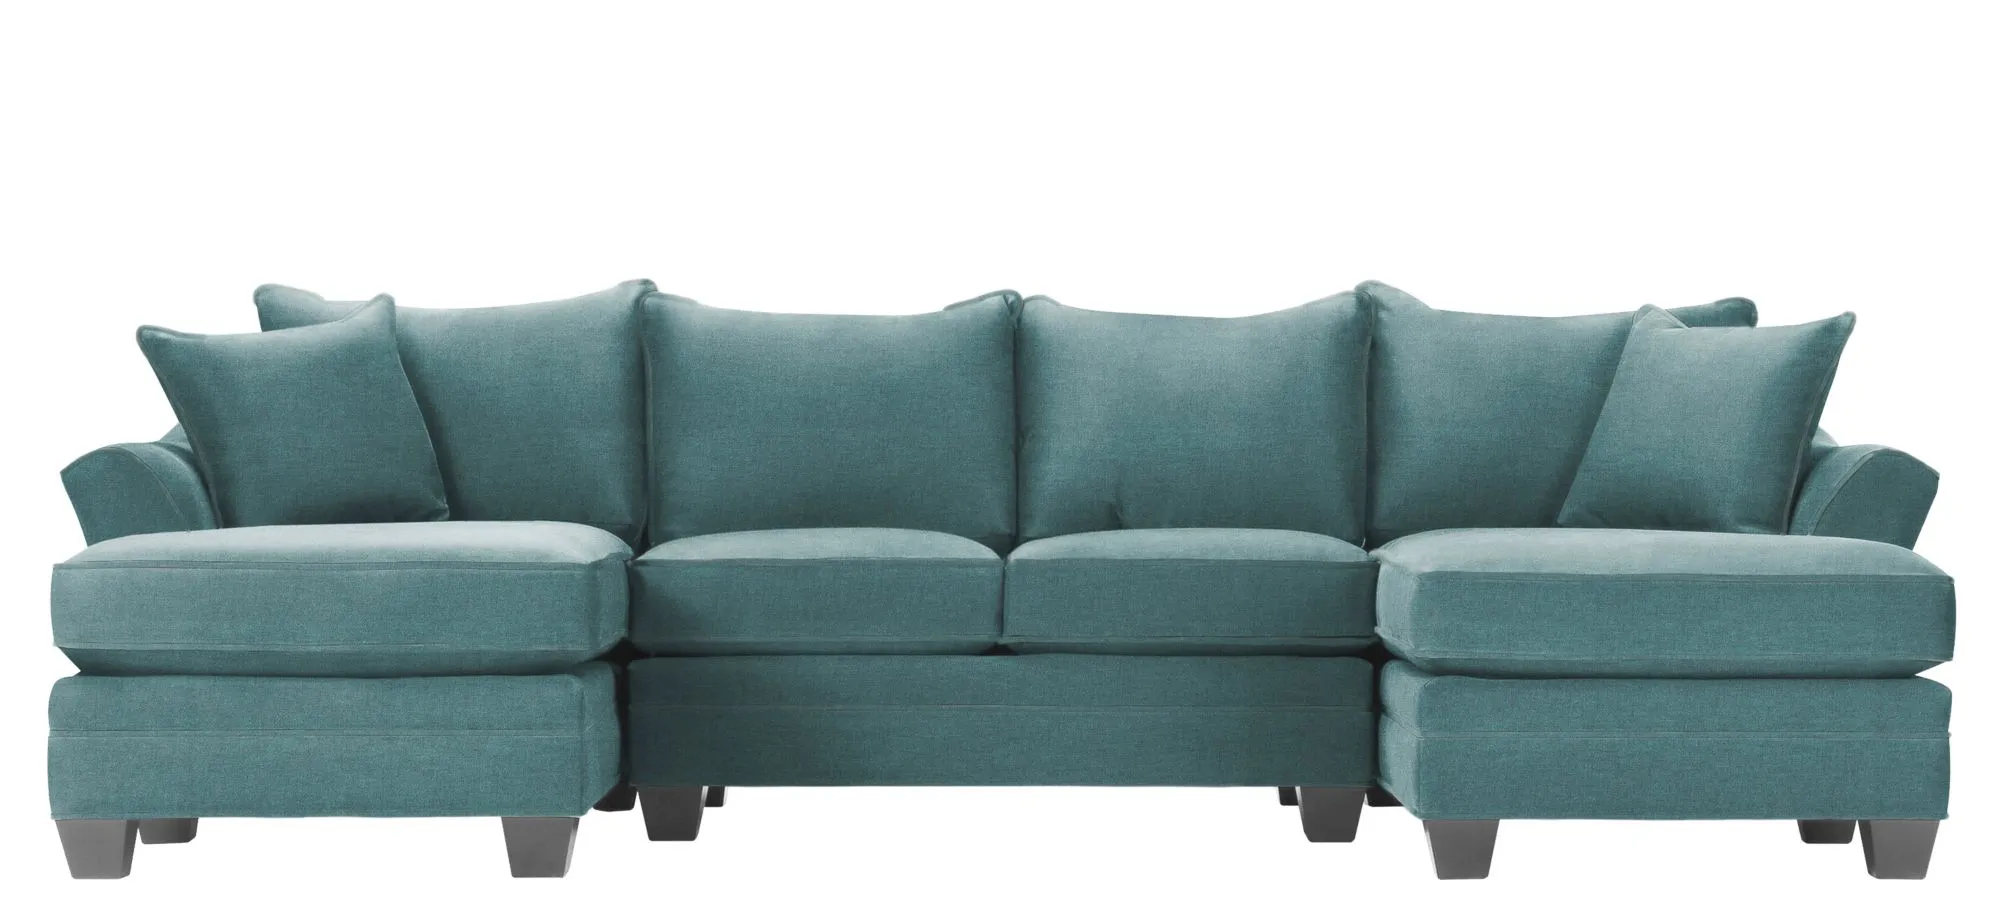 Foresthill 3-pc. Symmetrical Chaise Sectional Sofa in Santa Rosa Turquoise by H.M. Richards